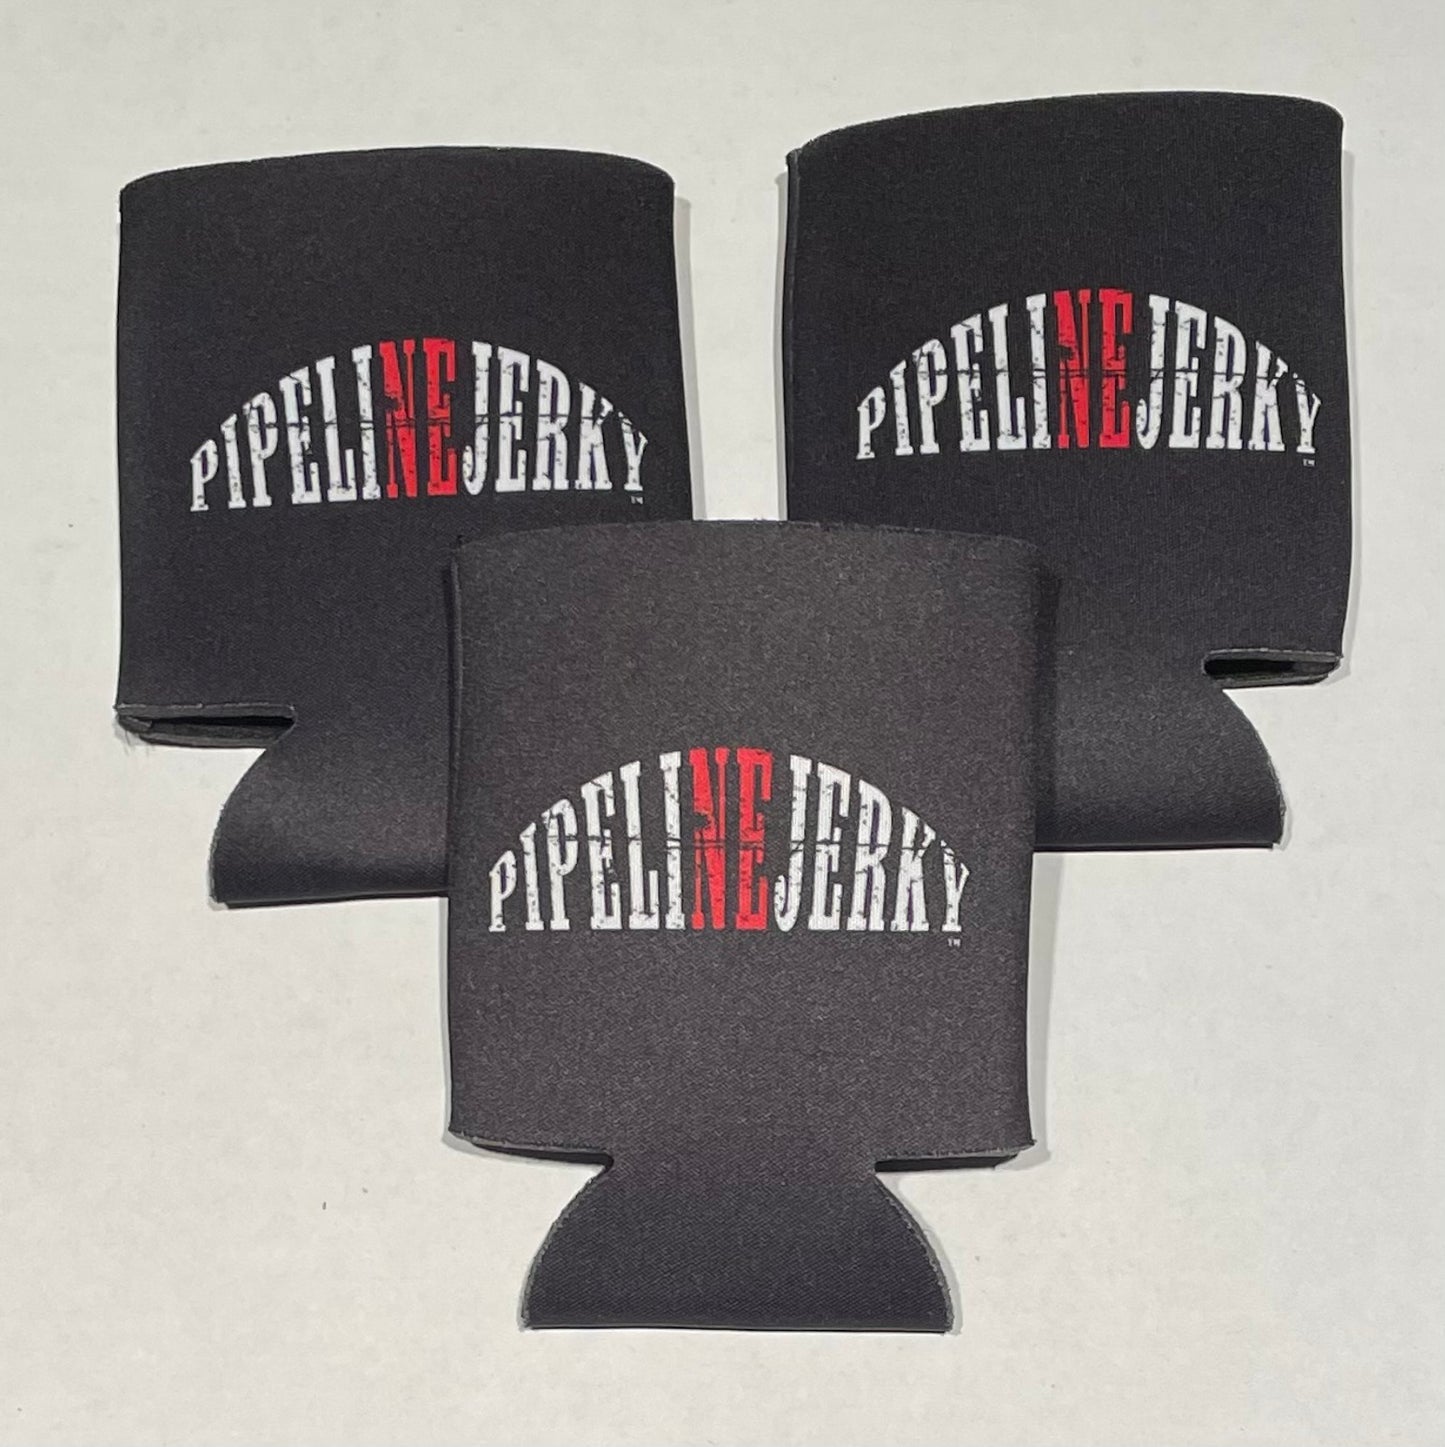 Pipeline Jerky Coozie